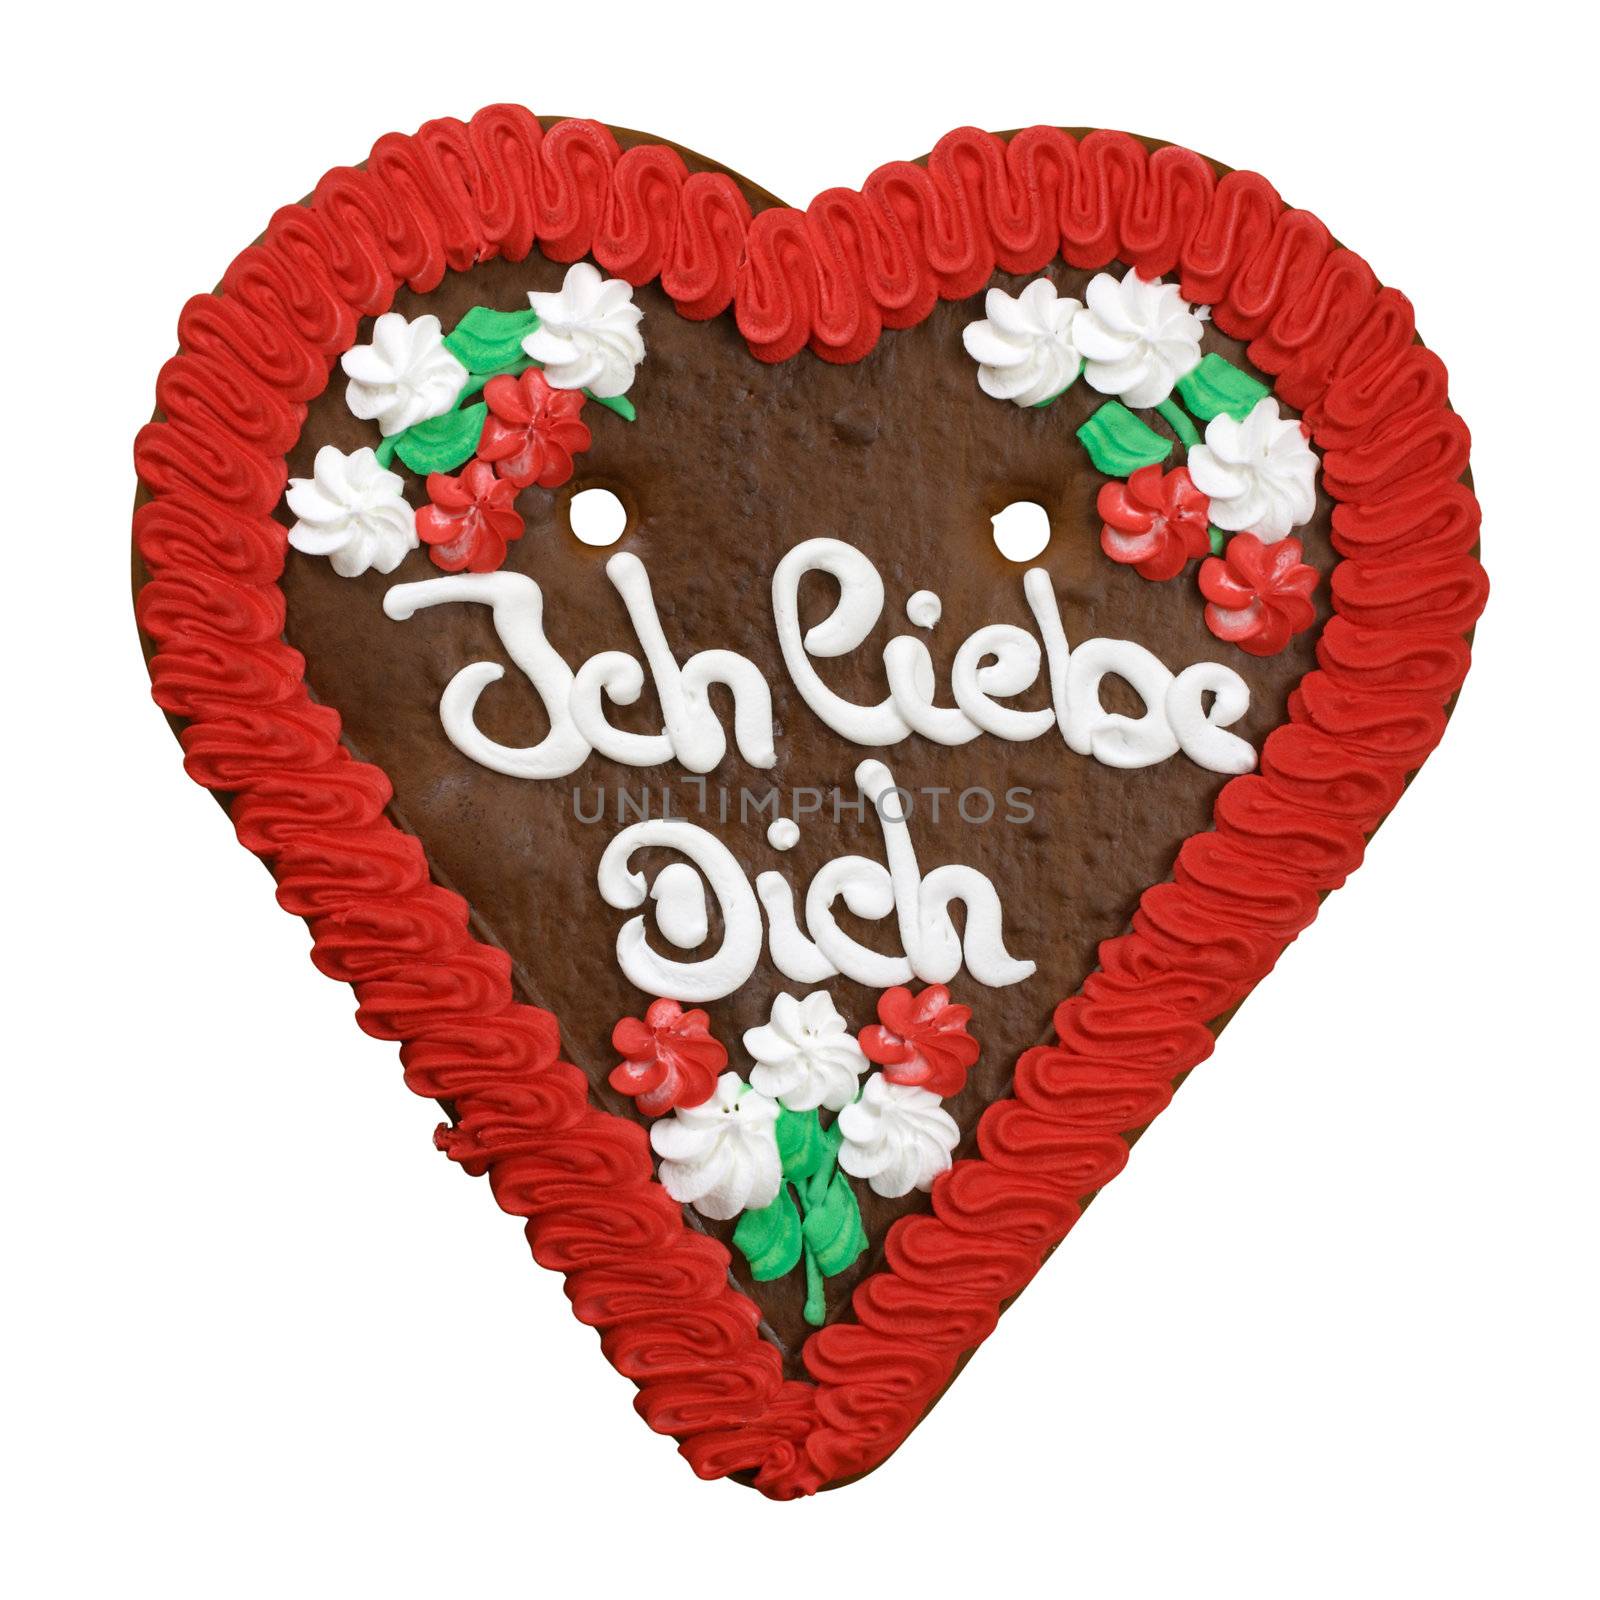 I Love You gingerbread cookie. Typical souvenir of German culture in fairs and the famous Oktoberfest in Munich.